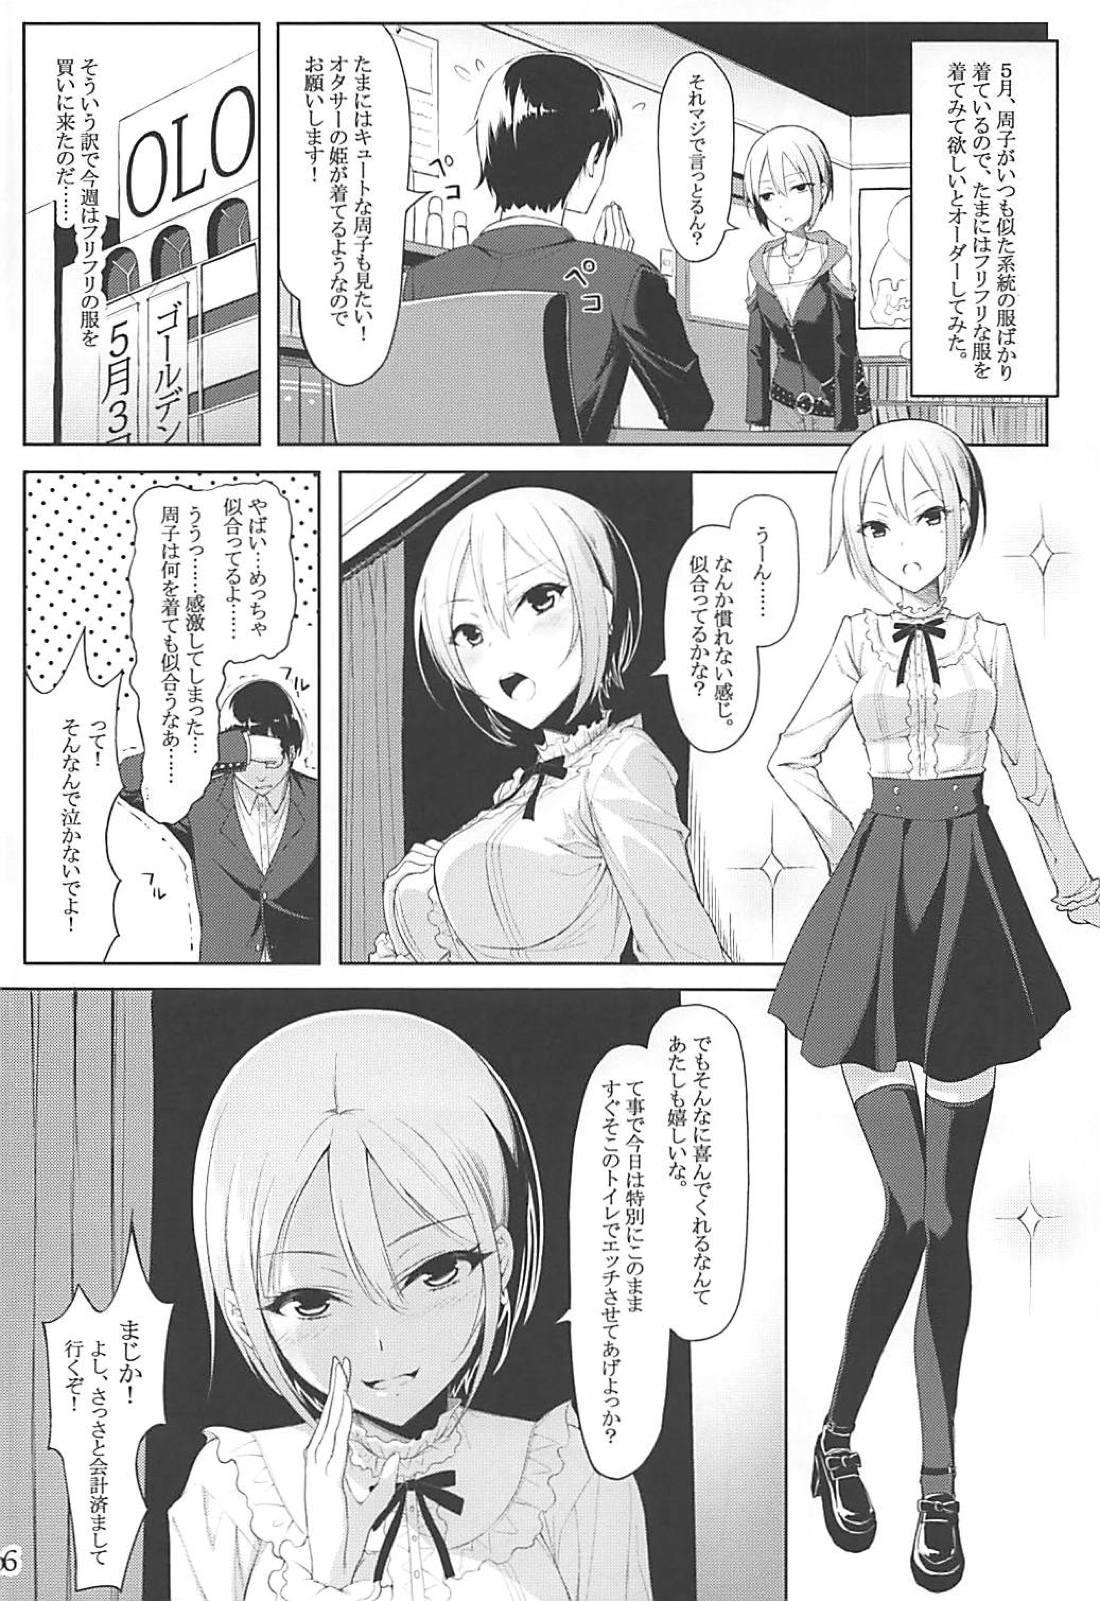 Naija THE GIRL WITH THE FLAXEN HAIR - The idolmaster Submissive - Page 5